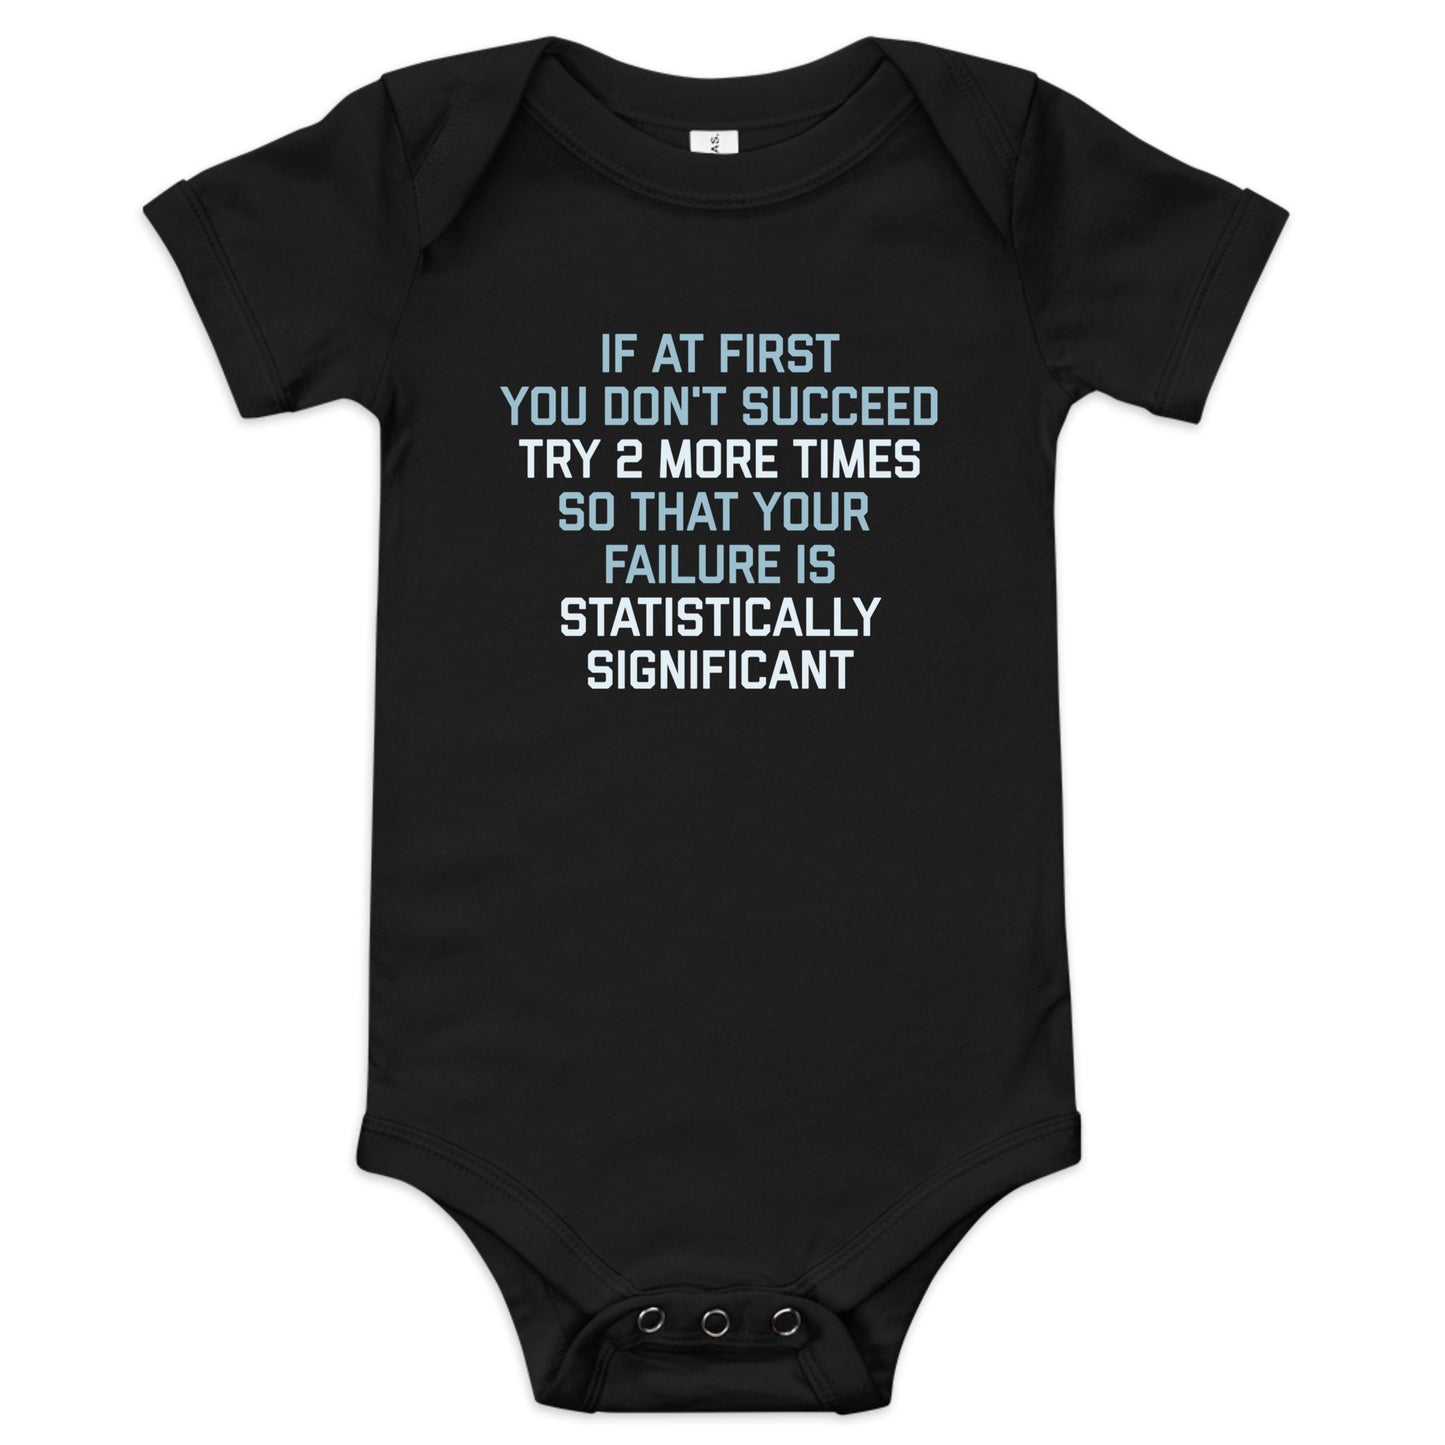 Try 2 More Times So That Your Failure Is Statistically Significant Kid's Onesie